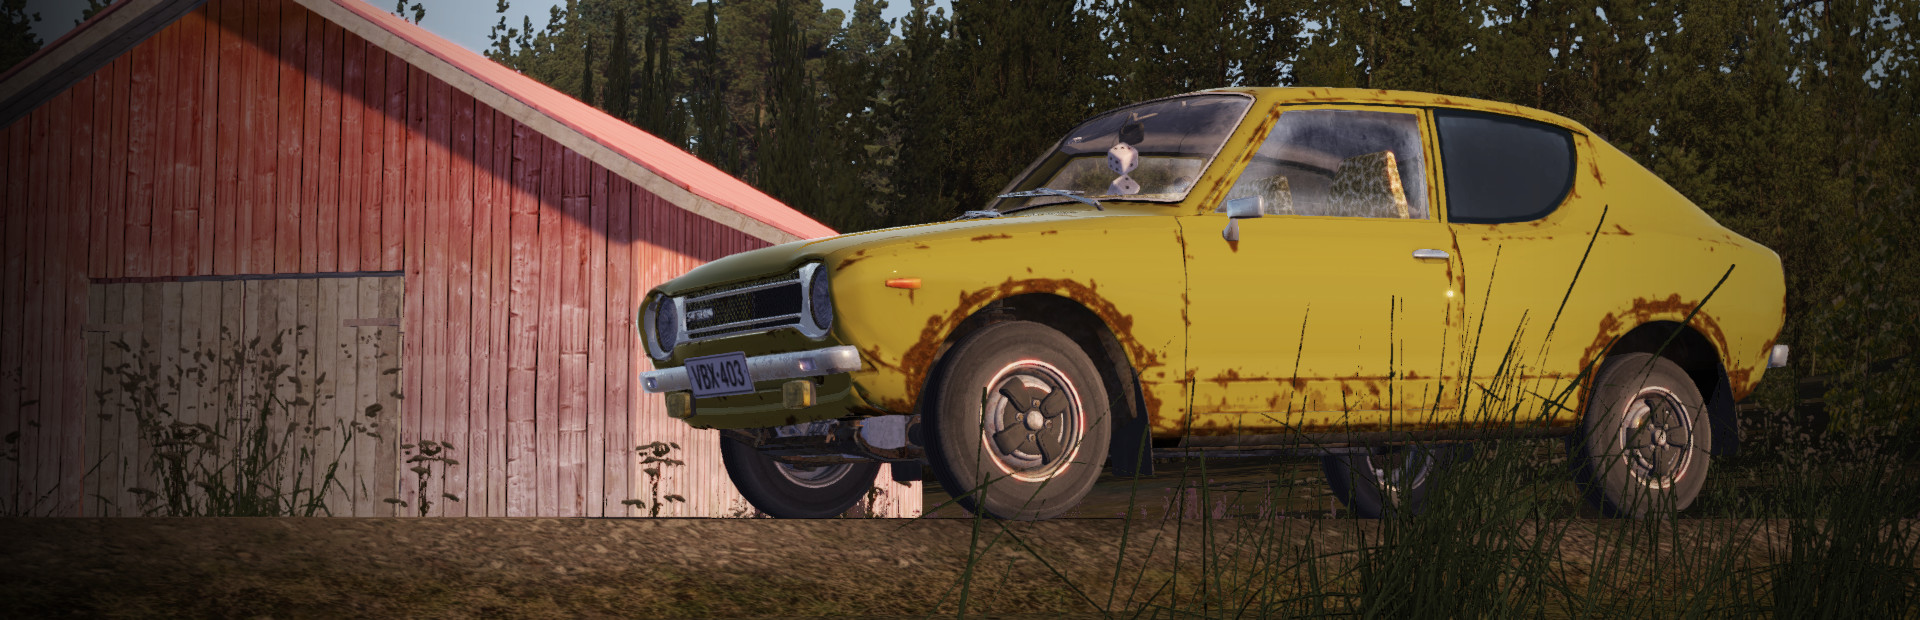 My Summer Car cover image